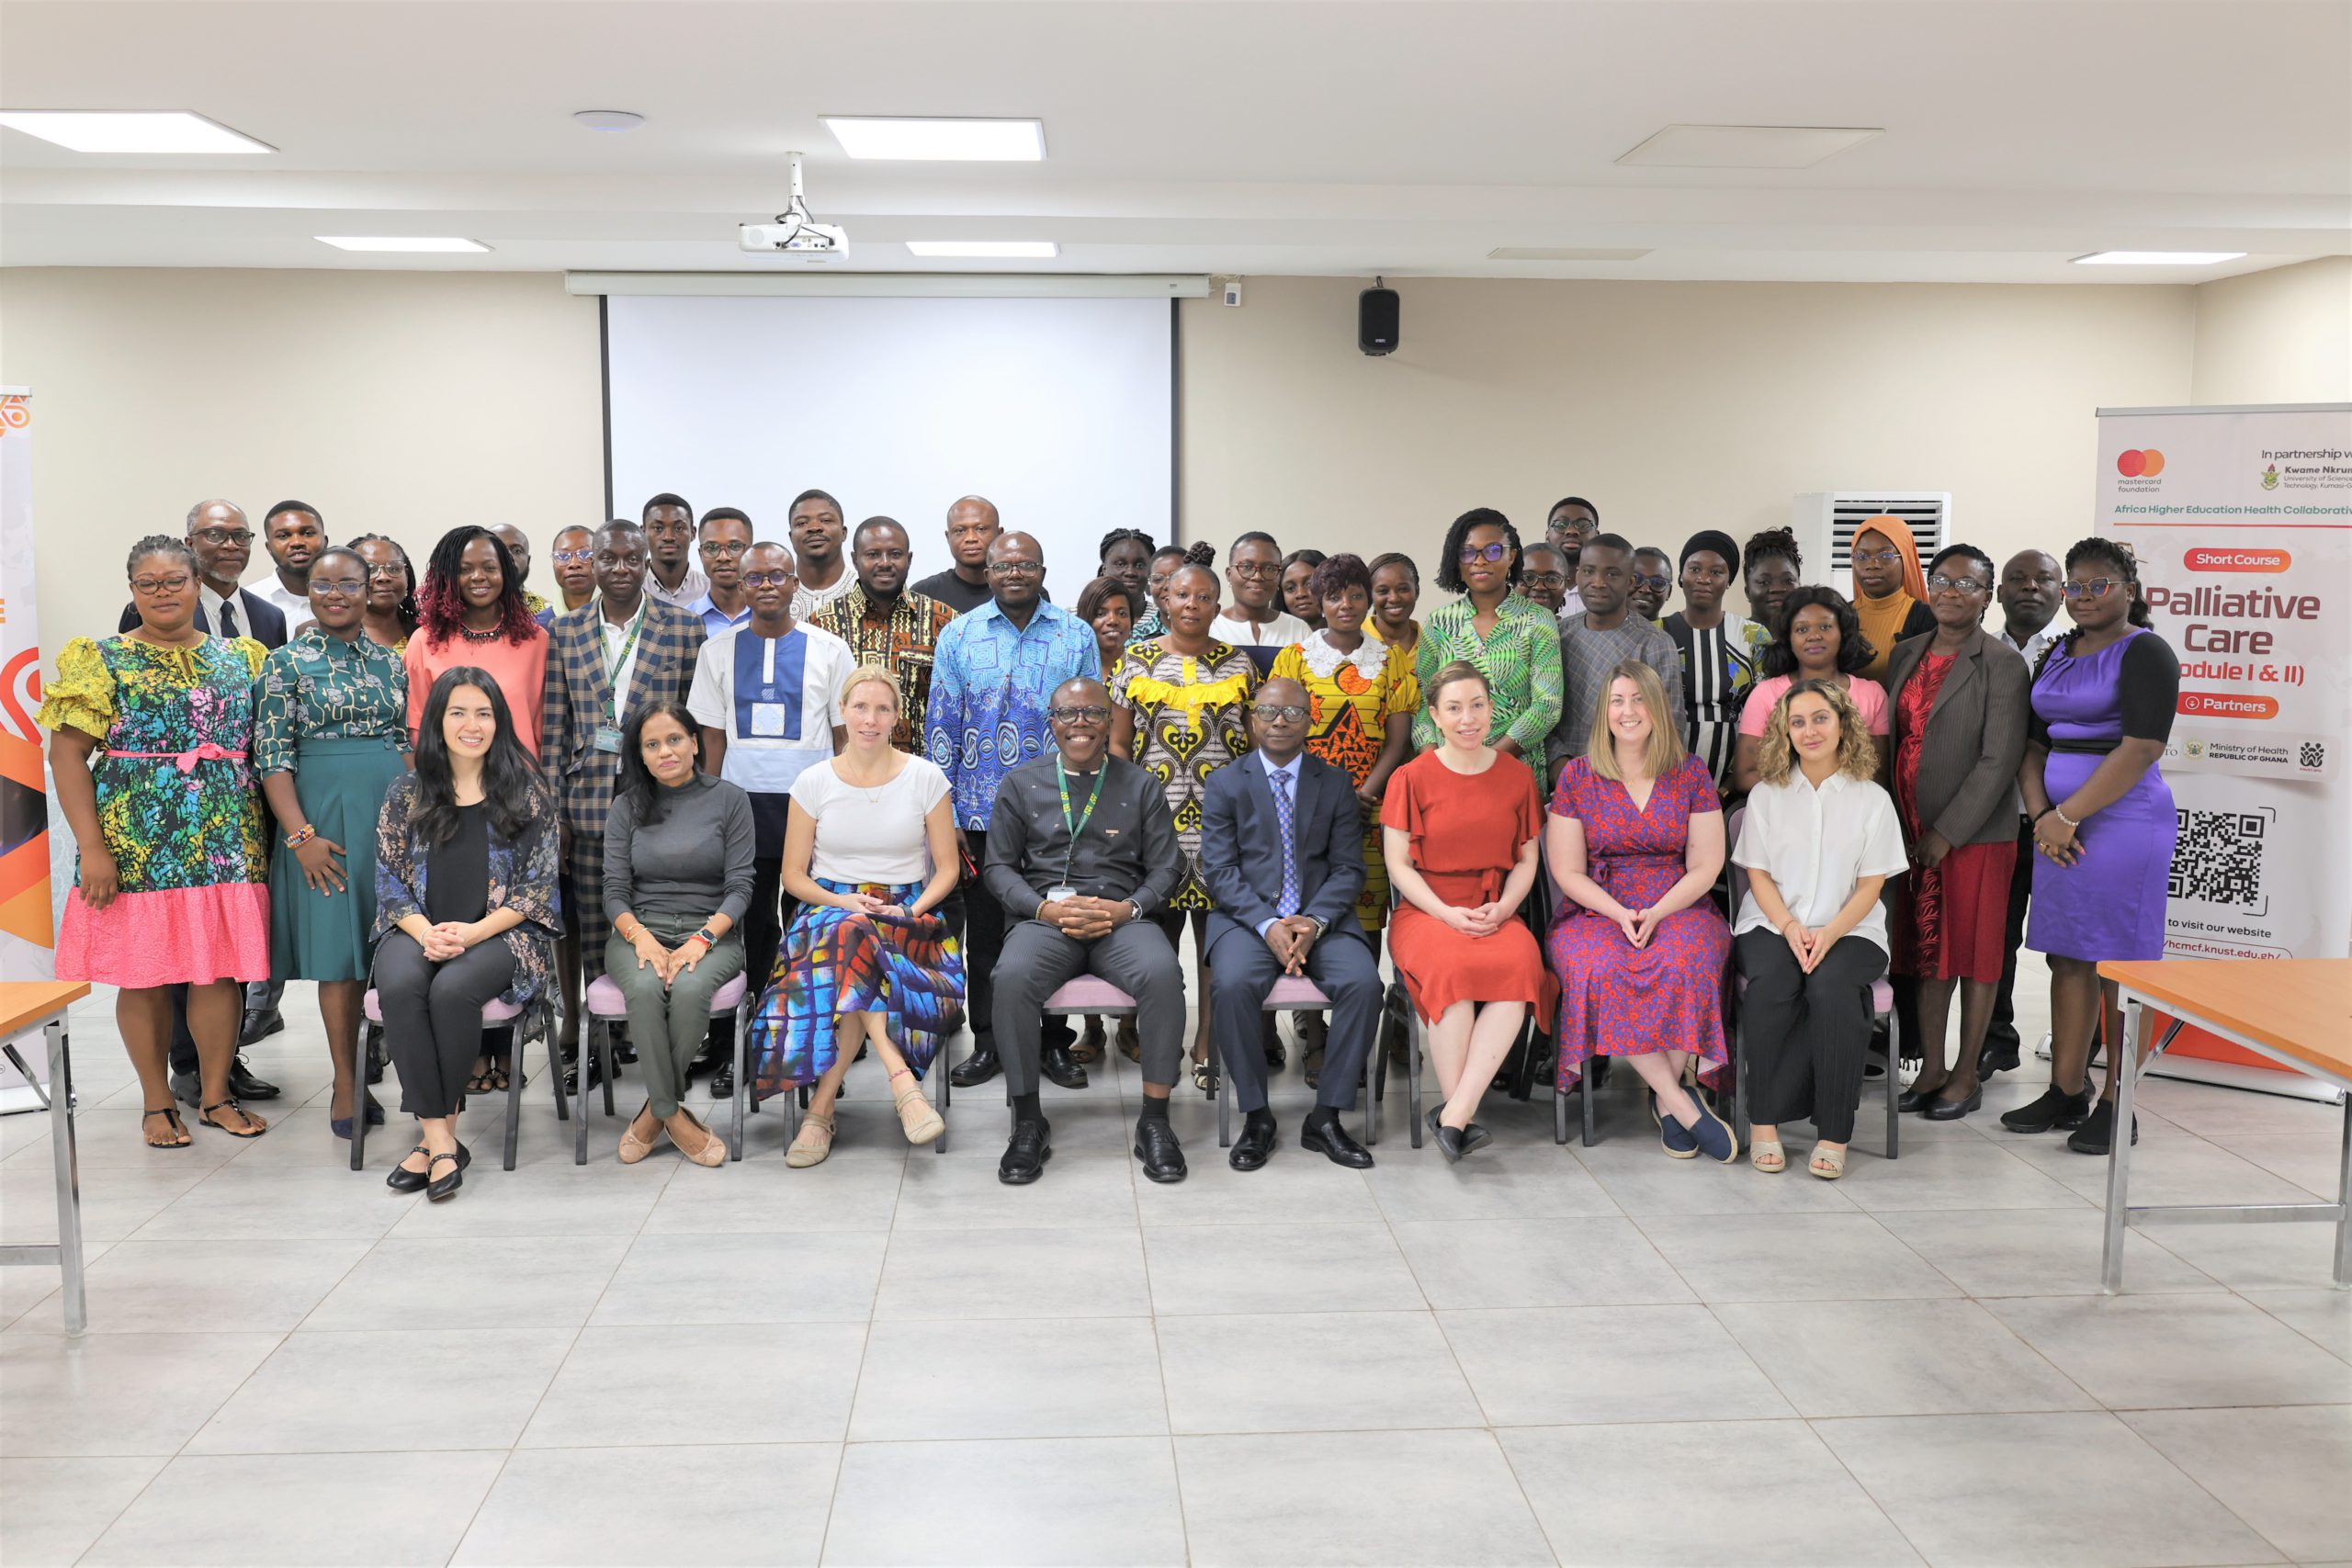 23 selected for cohort II of Africa Health Collaborative palliative care workshop [Video]